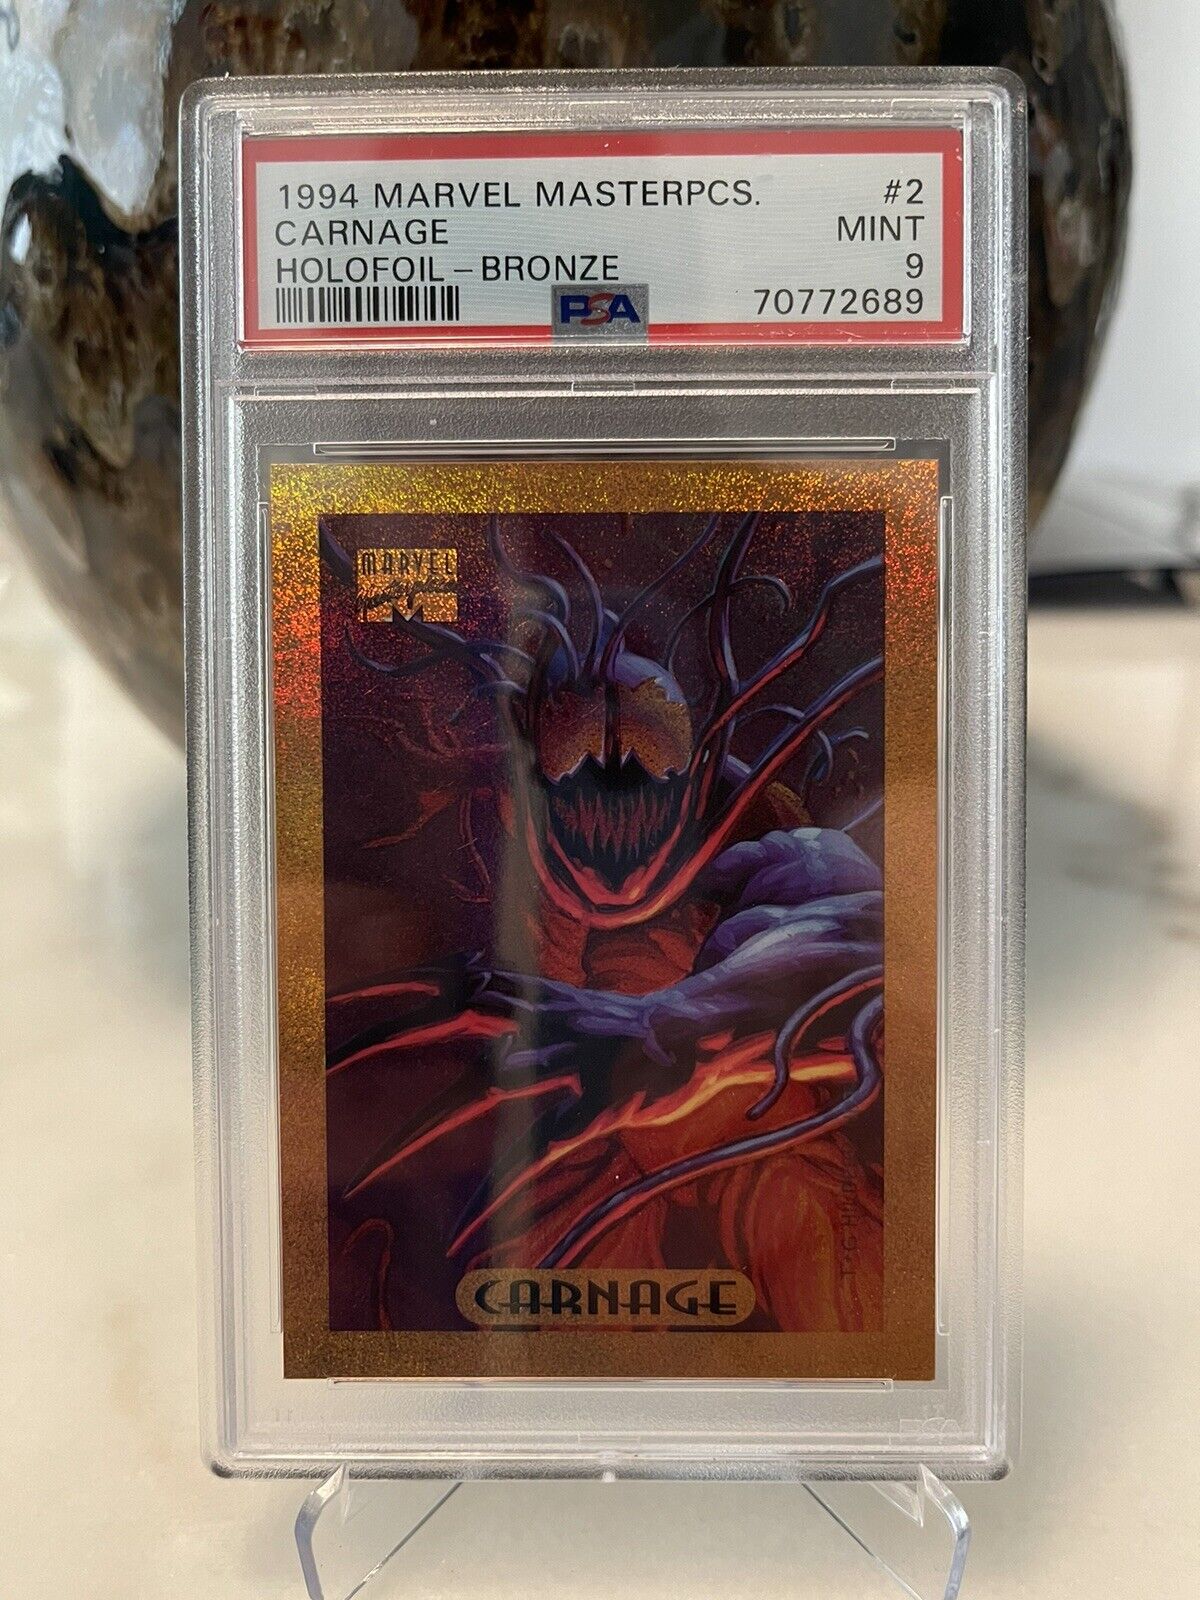 1994 Marvel Masterpieces Carnage Holofoil Bronze PSA 9 Mint👍👍🔥🔥great Quality